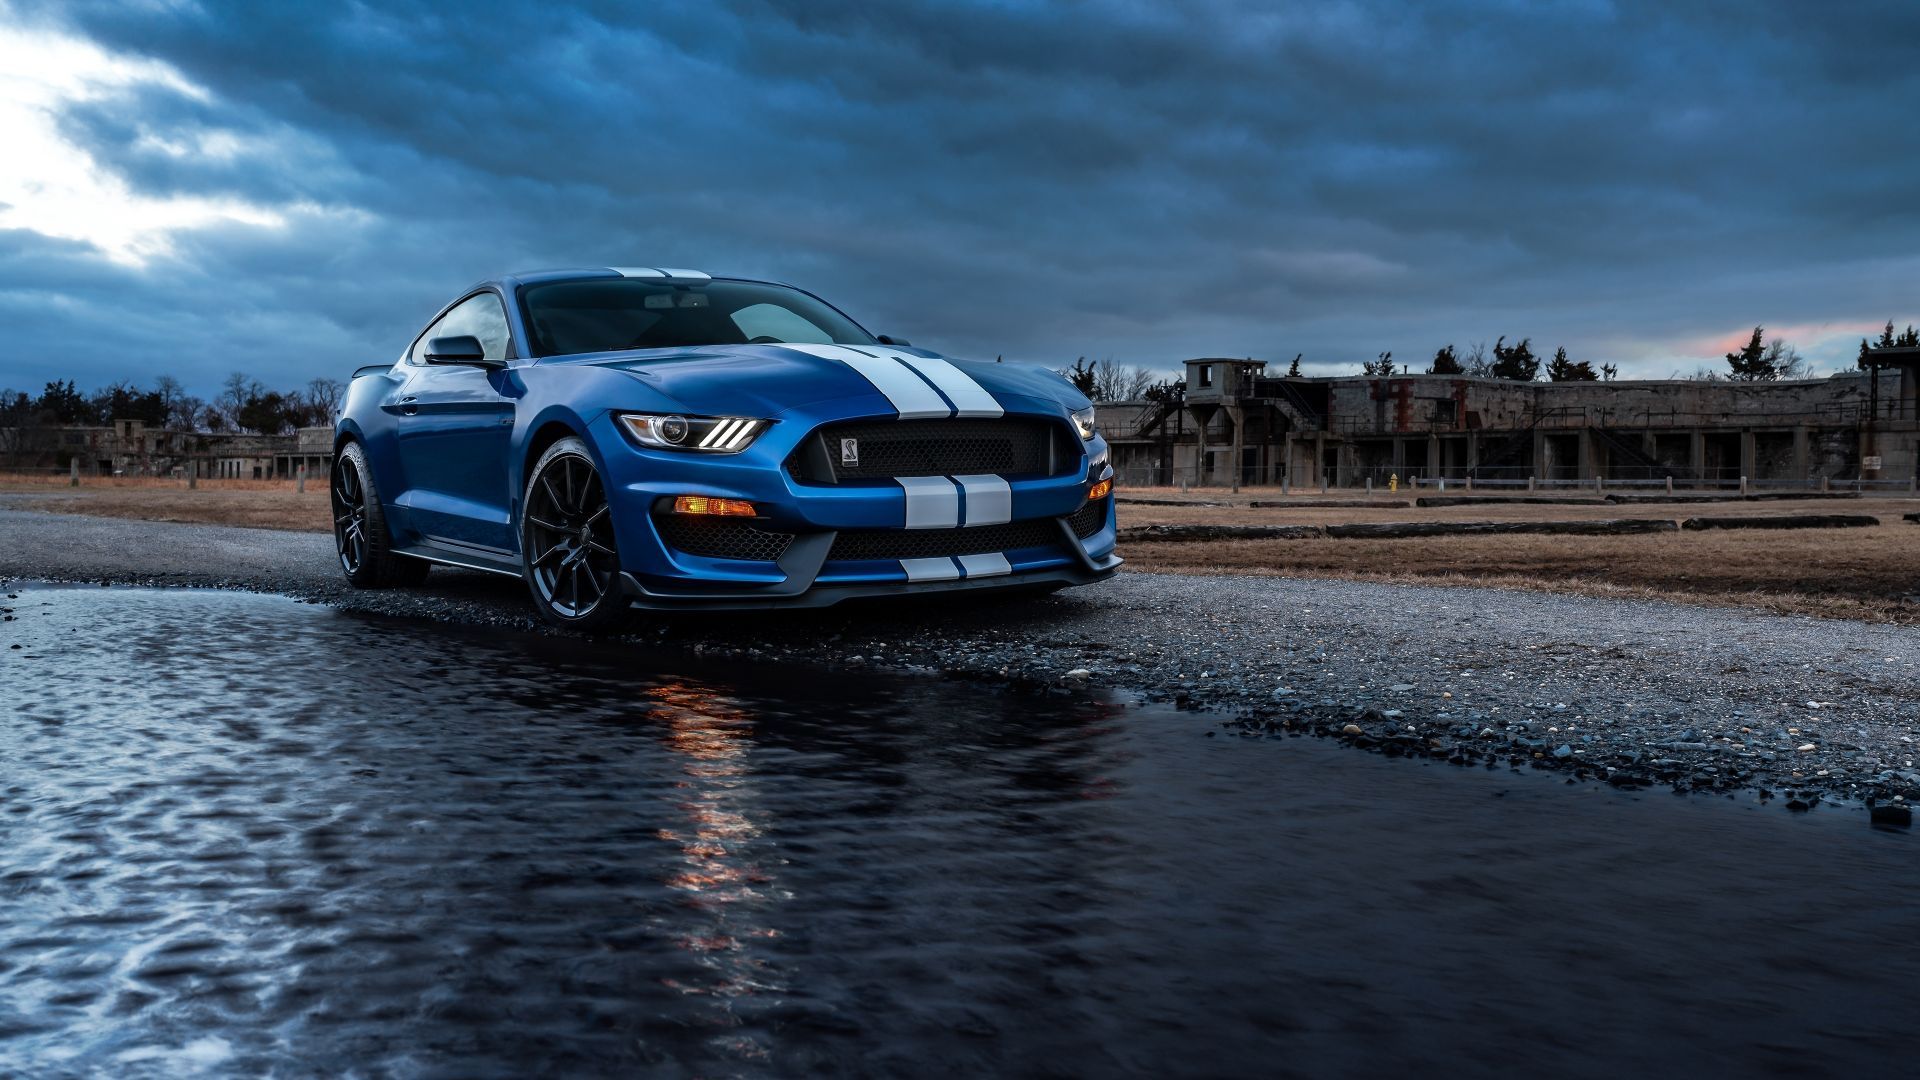 Desktop wallpaper 2020 ford mustang, blue car, HD image, picture, background, e48cde